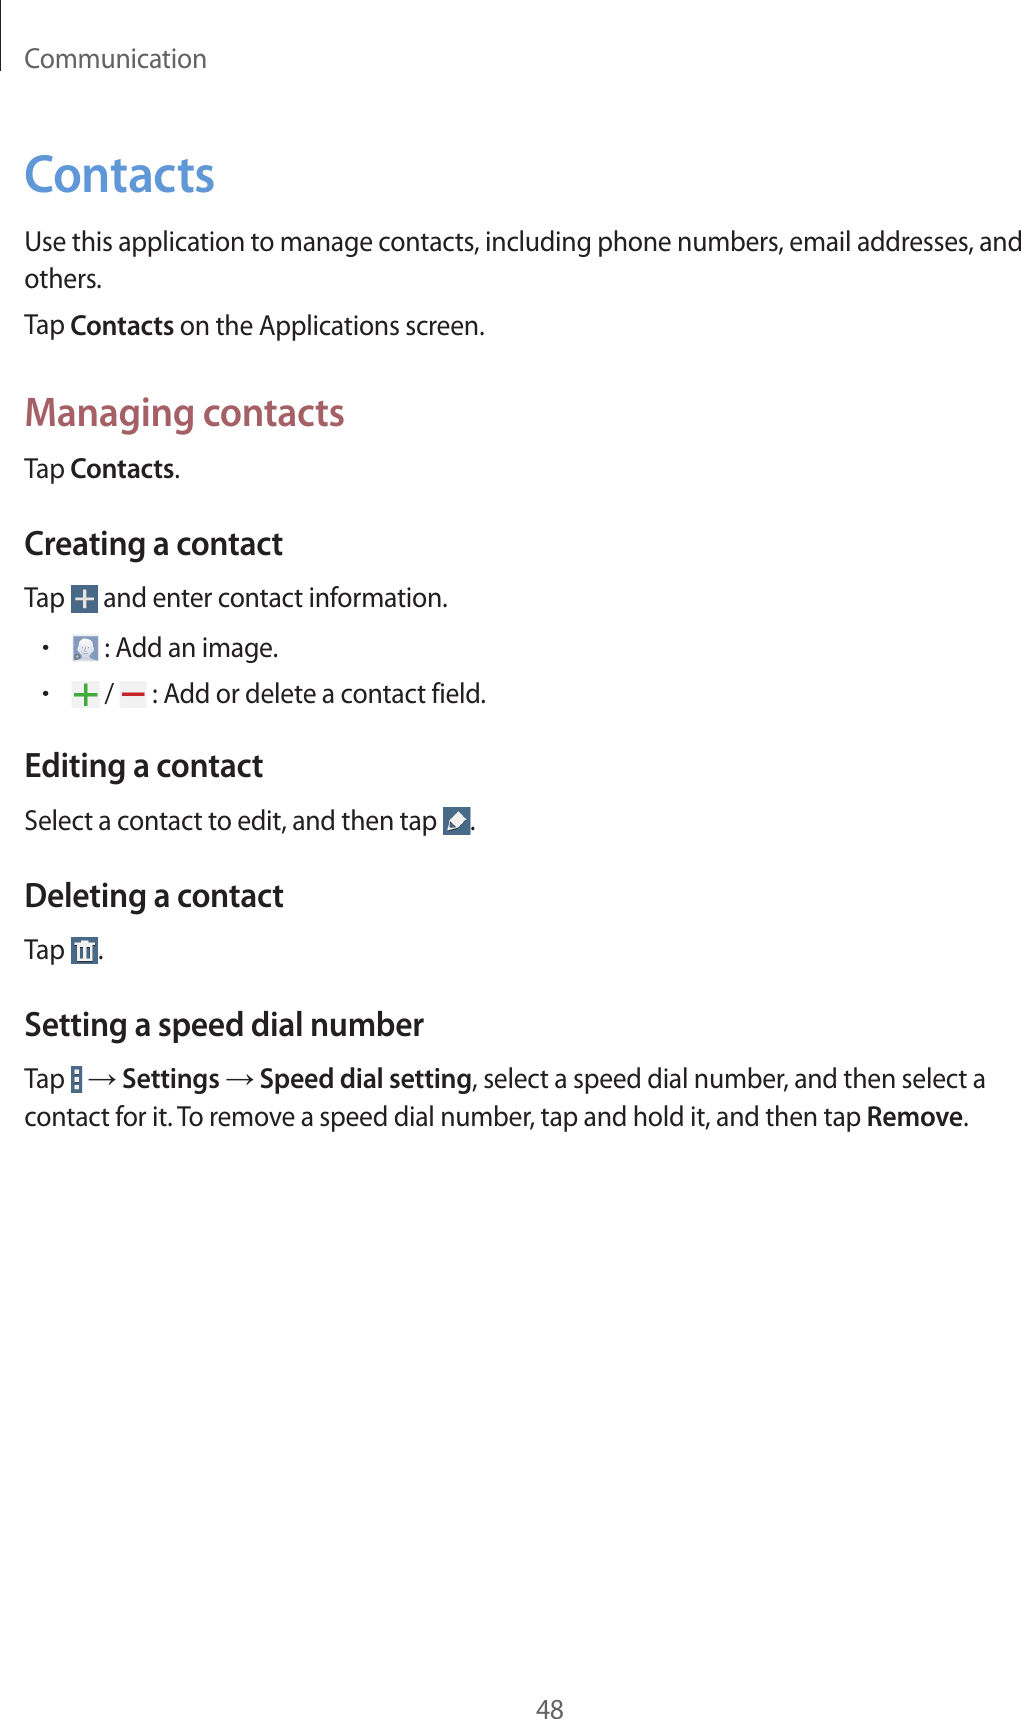 Communication48ContactsUse this application to manage contacts, including phone numbers, email addresses, and others.Tap Contacts on the Applications screen.Managing contactsTap Contacts.Creating a contactTap   and enter contact information.• : Add an image.• /   : Add or delete a contact field.Editing a contactSelect a contact to edit, and then tap  .Deleting a contactTap  .Setting a speed dial numberTap   → Settings → Speed dial setting, select a speed dial number, and then select a contact for it. To remove a speed dial number, tap and hold it, and then tap Remove.